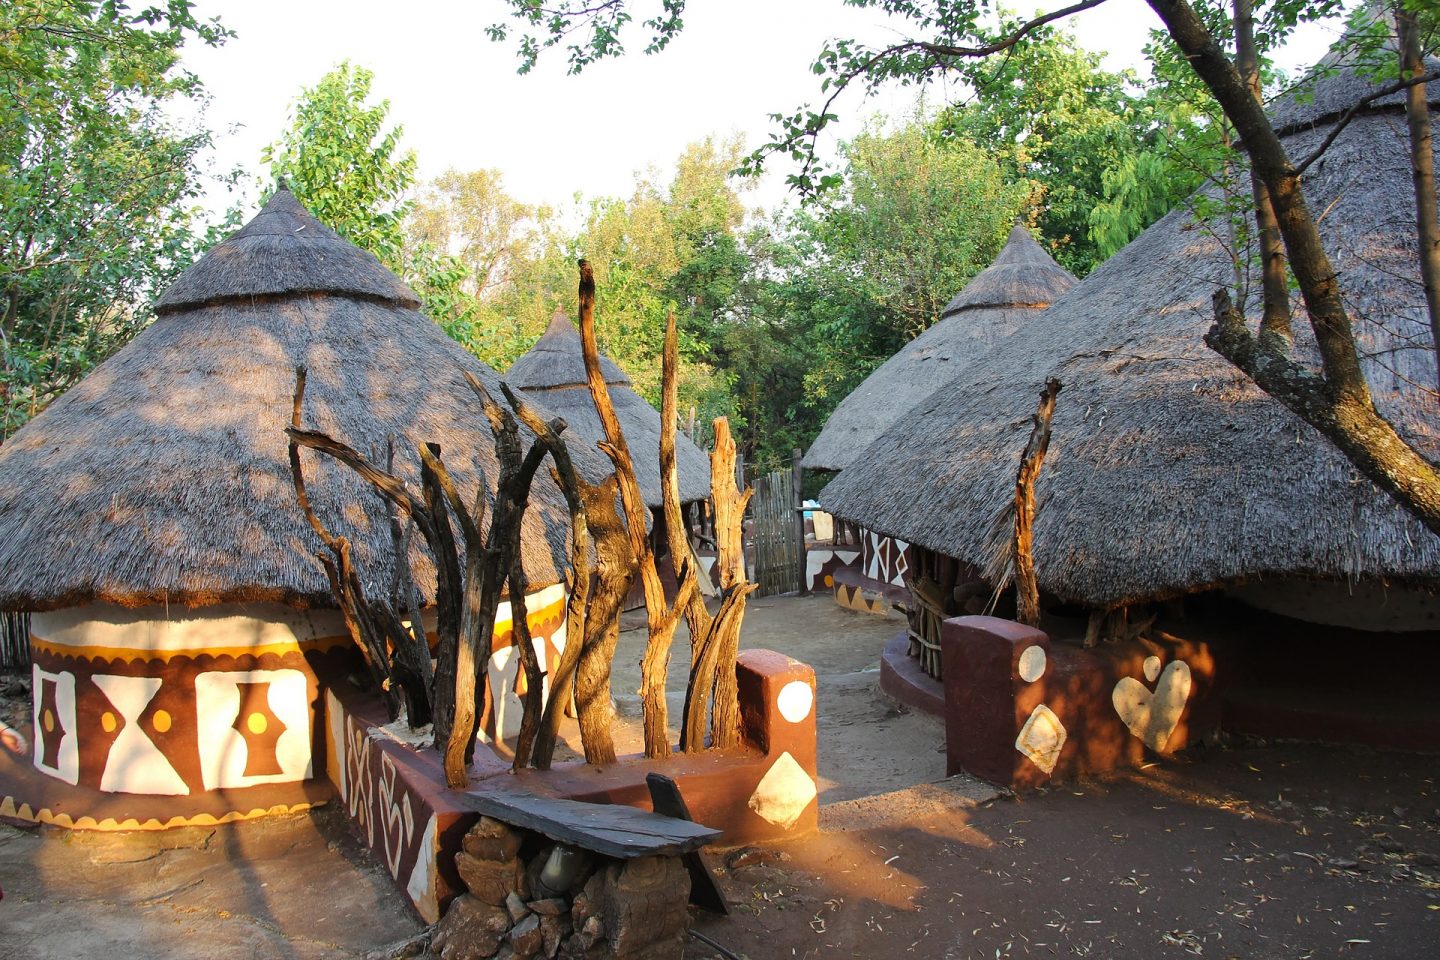 An image of traditional homes on a day trip from Johannesburg